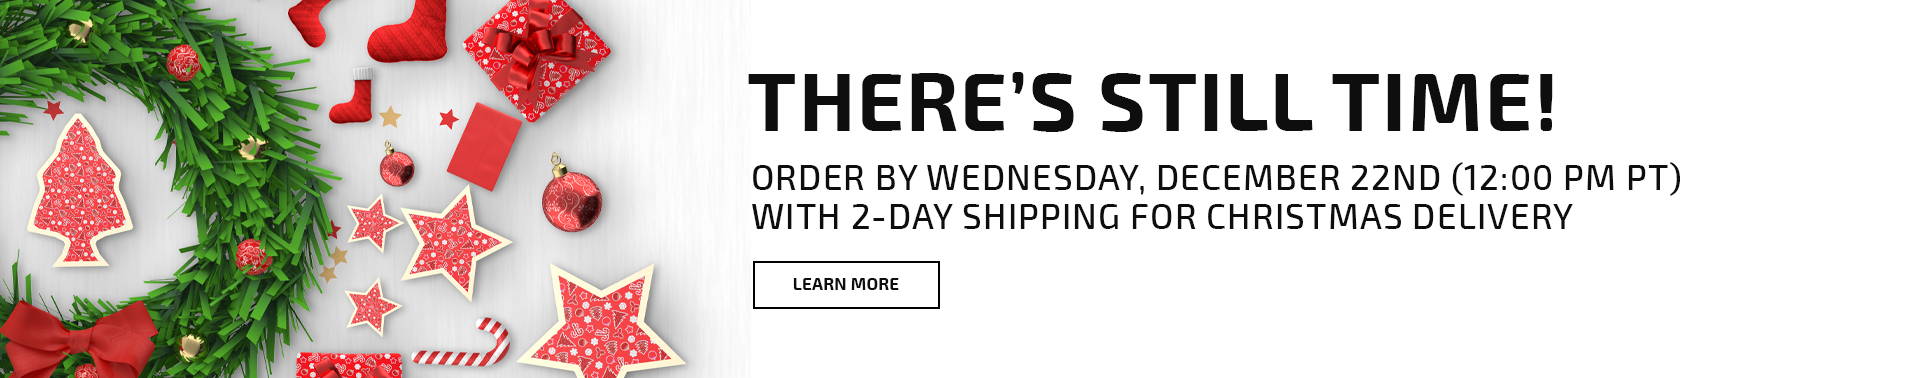 There's still time! Order by Wednesday, December 22nd (12:00 PM PT) with 2-Day Shipping for Christmas delivery